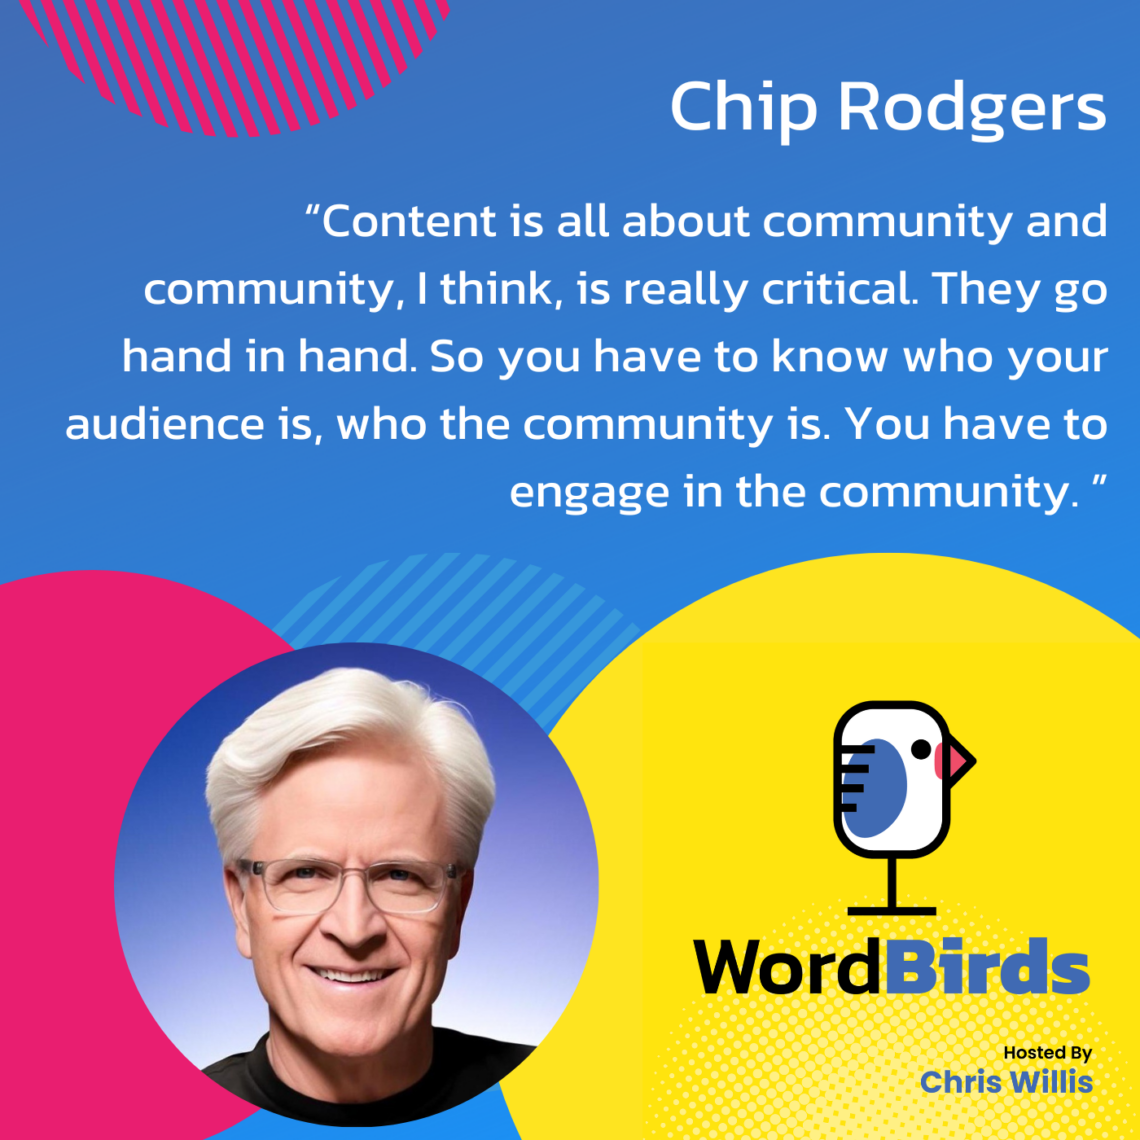 On a blue background there's a quote from Chip Rodgers in white that takes up the majority of the image. The bottom of the image has a headshot image of Chip and the WordBirds Podcast logo.